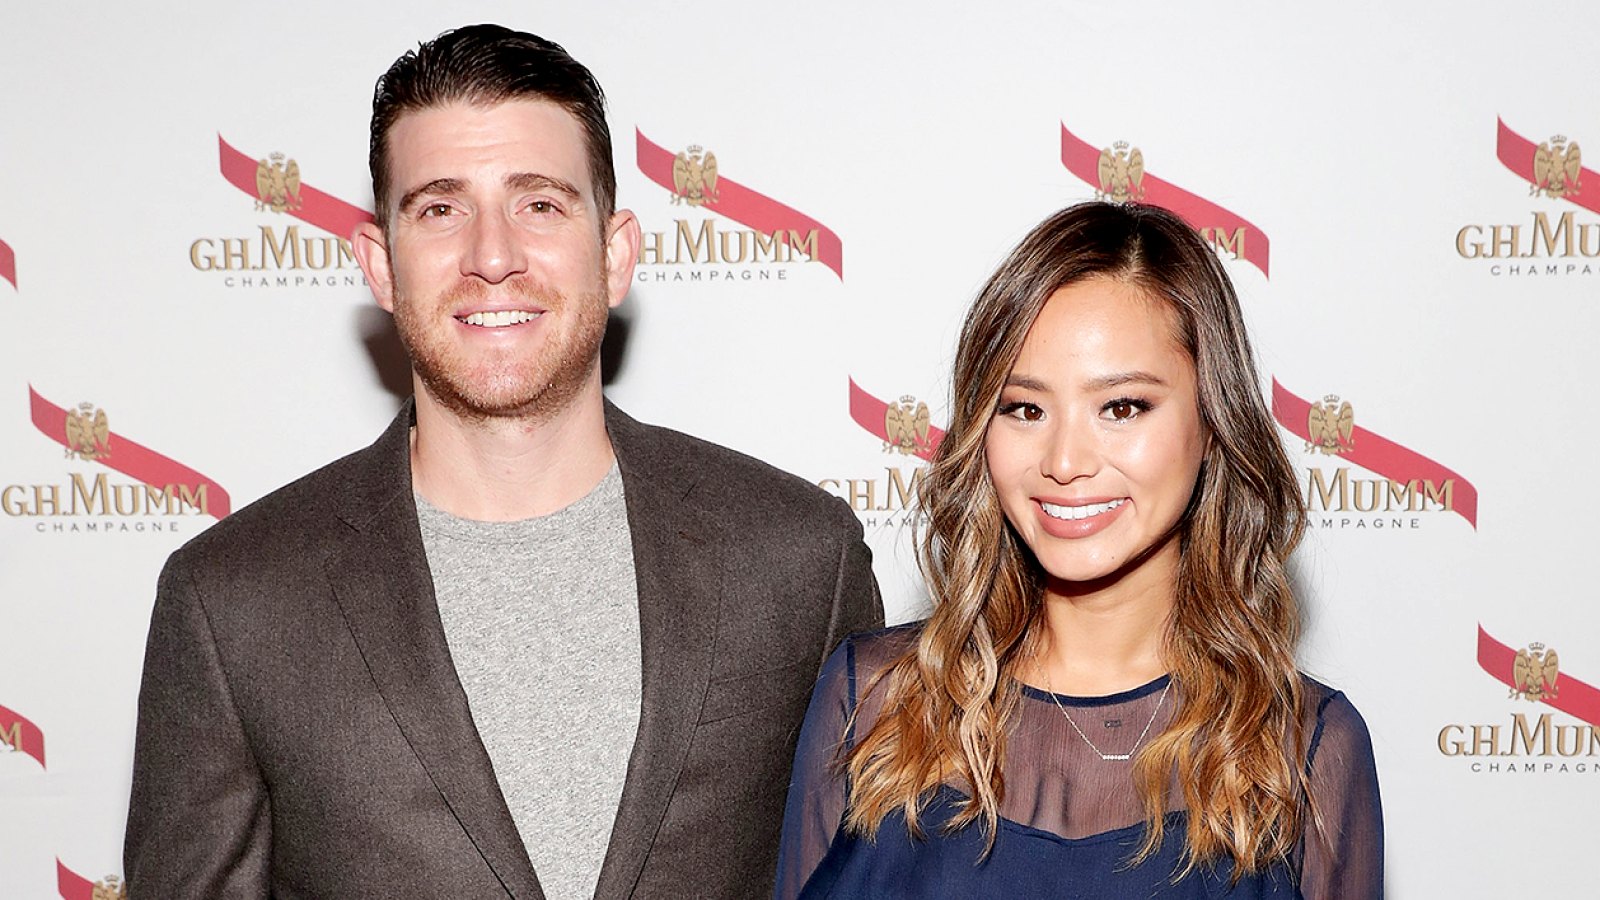 Bryan Greenberg and Jamie Chung attend the Snowstorm By G.H. Mumm Launch Party on November 16, 2016 in New York City.